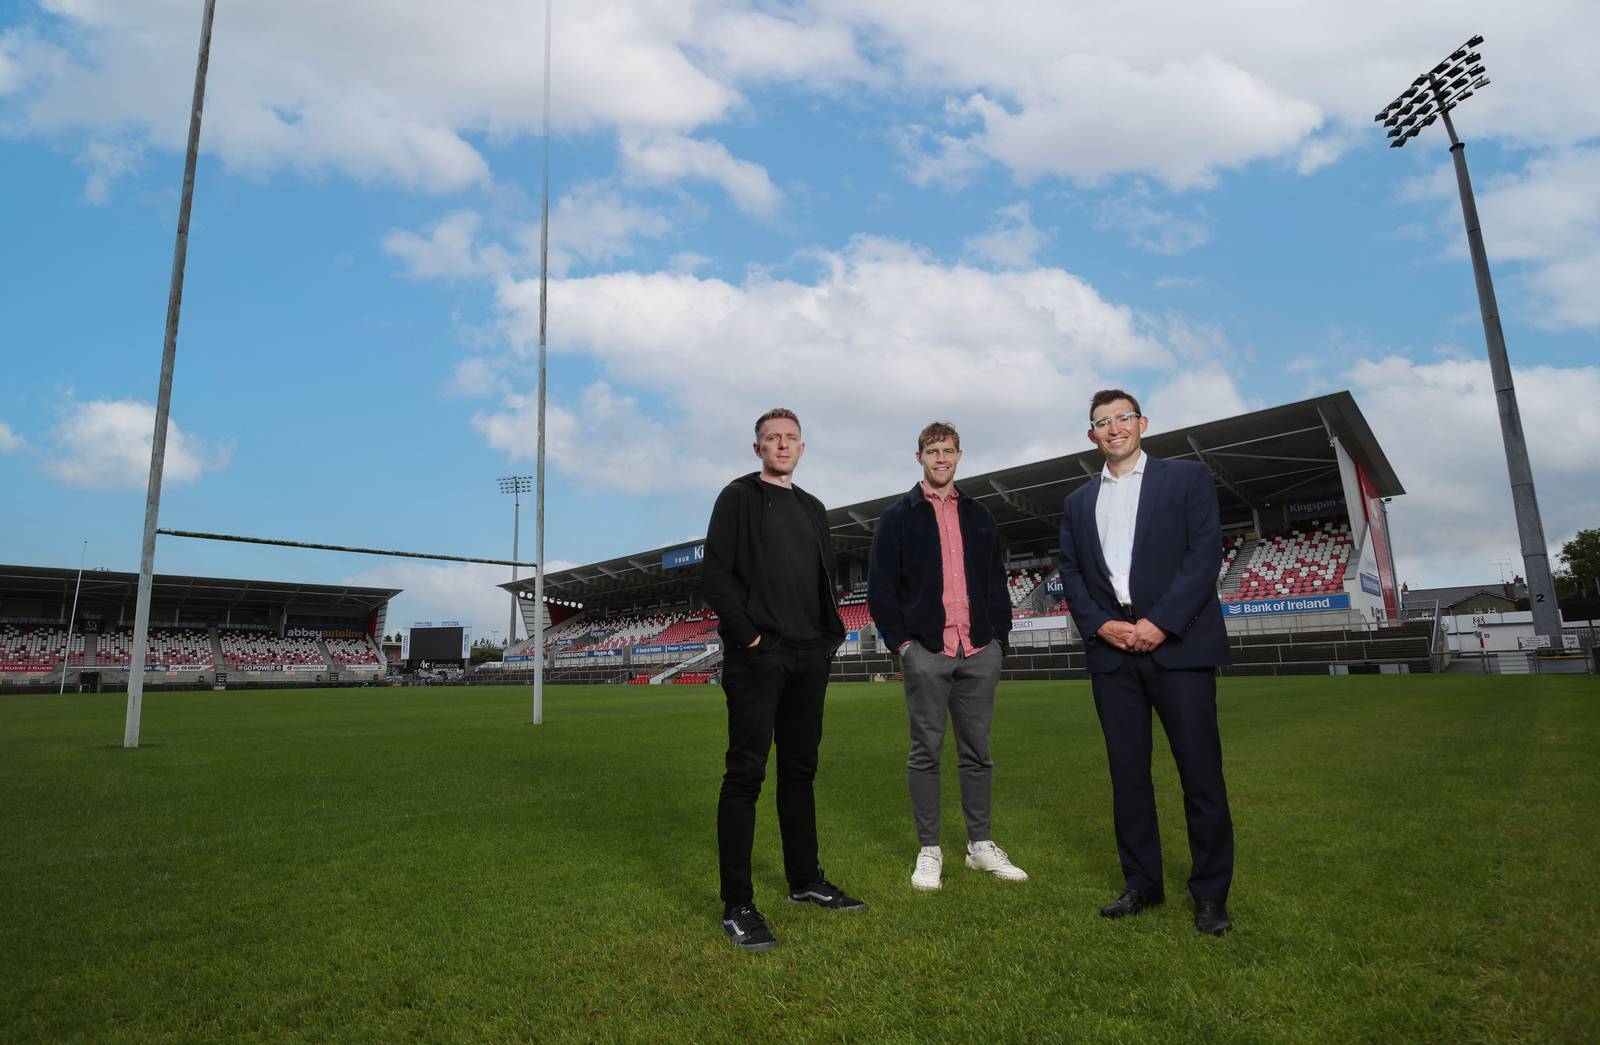 Gareth Quinn, Chief Operating Officer at Kairos Sports Tech, Andrew Trimble, Chief Executive Officer at Kairos Sports Tech and James Thompson, Financial Analyst at Whiterock Finance.